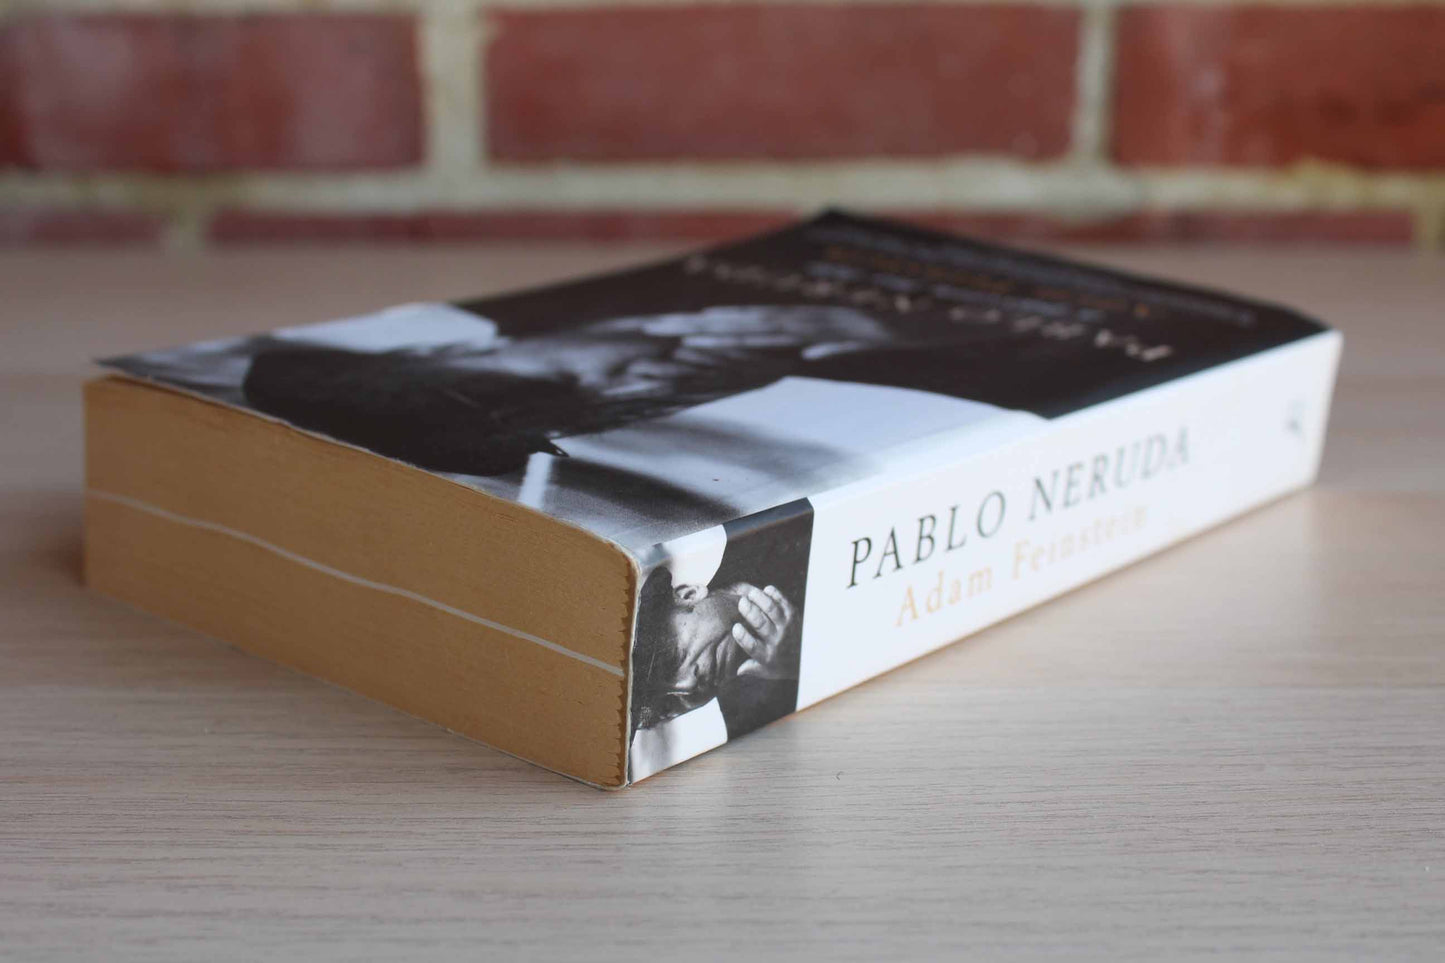 Pablo Neruda:  A Passion for Life by Adam Feinstein